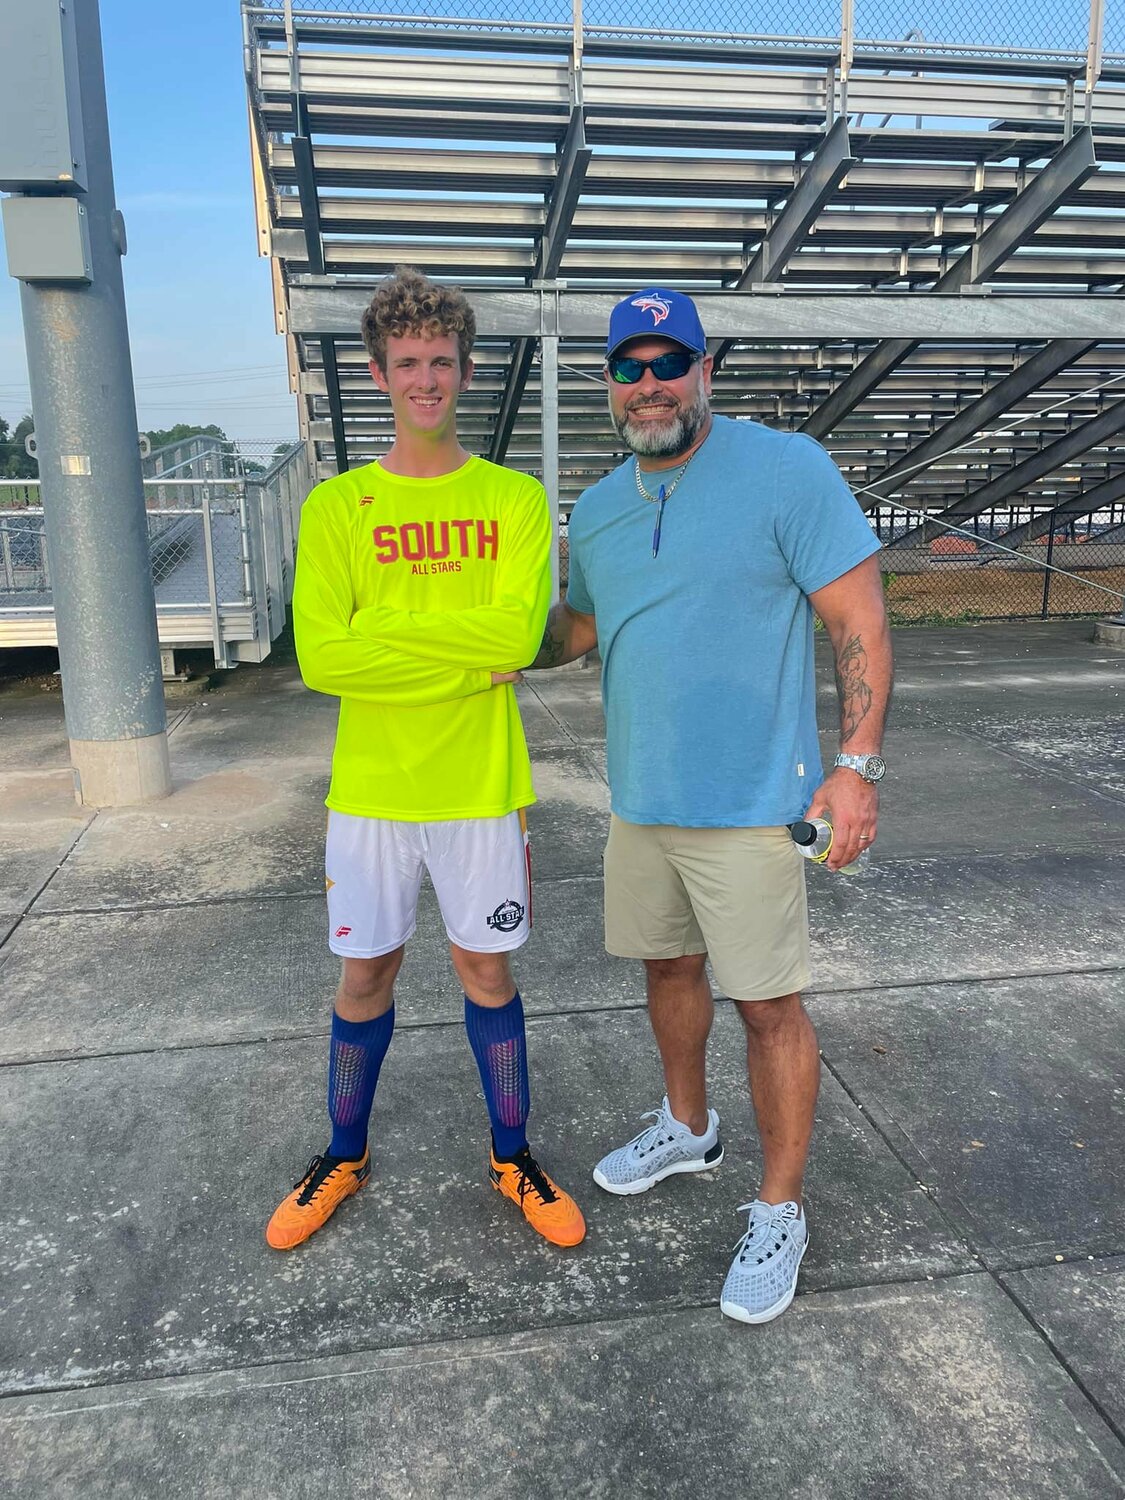 Orange Beach’s Lucean Pingrey competed in the AHSAA All-Star soccer contest in Montgomery on Wednesday, July 19, and had Mako athletic director Rob Morales as part of his fan section. Pingrey was one of eight local soccer players who helped account for 35 total local athletes who were named All-Stars.